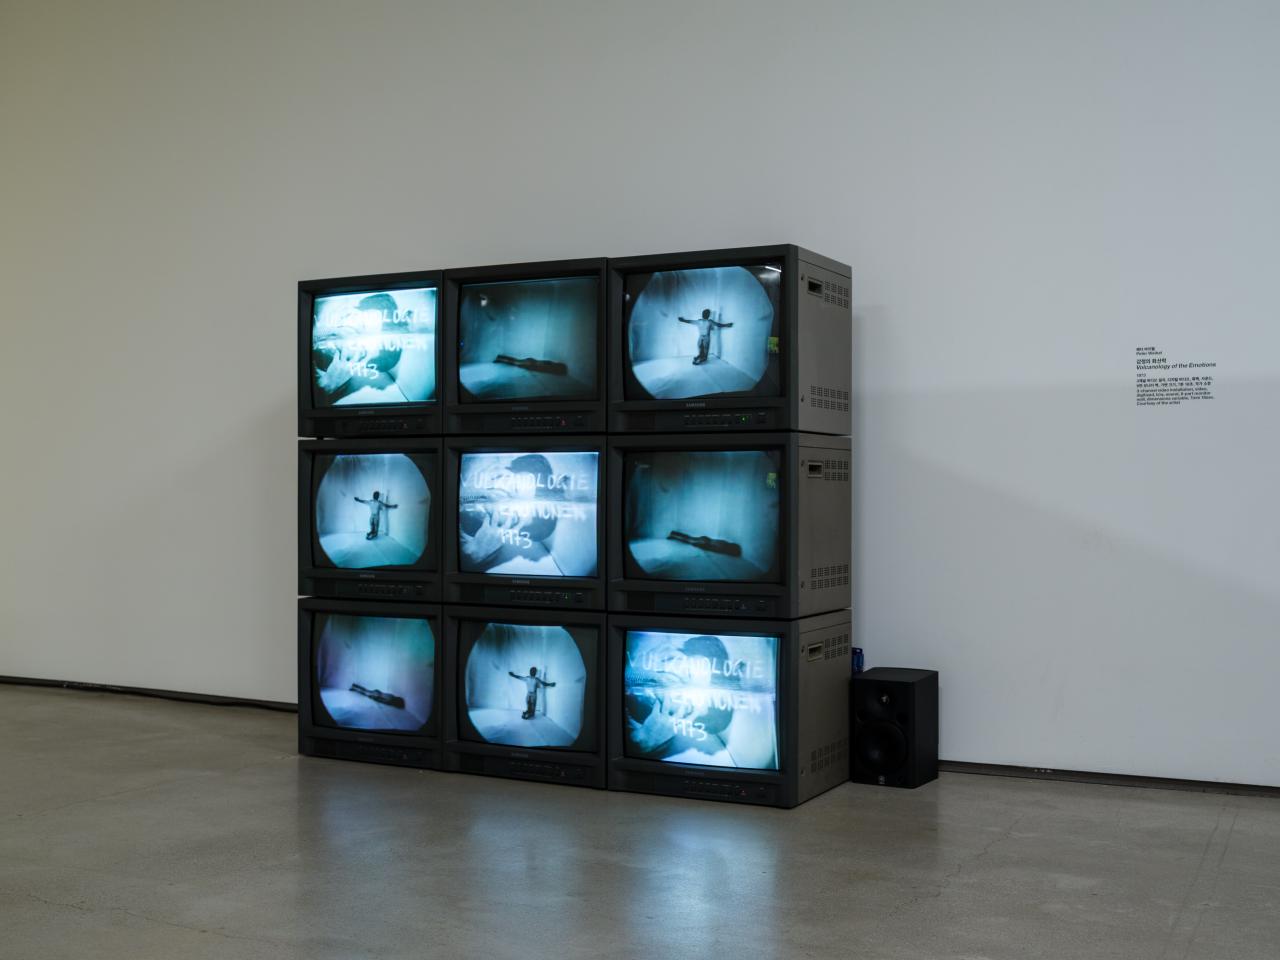 You can see nine small tube TVs, arranged as a square. They show a naked person in different positions in an empty room.